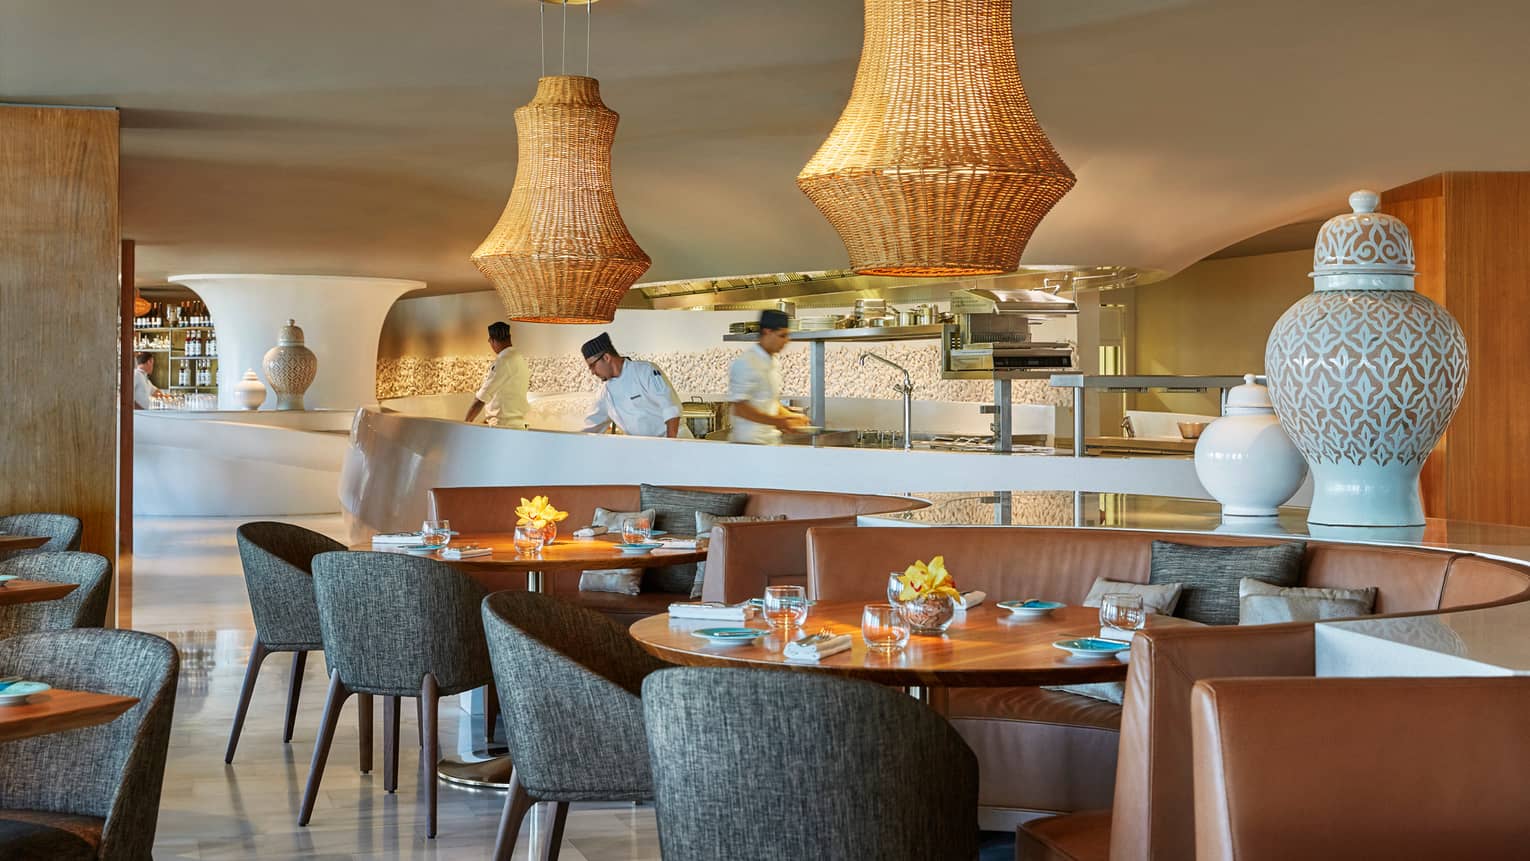 Large wicker lamps hang over mid-century style dining tables and chairs at Blue restaurant, chefs work in background